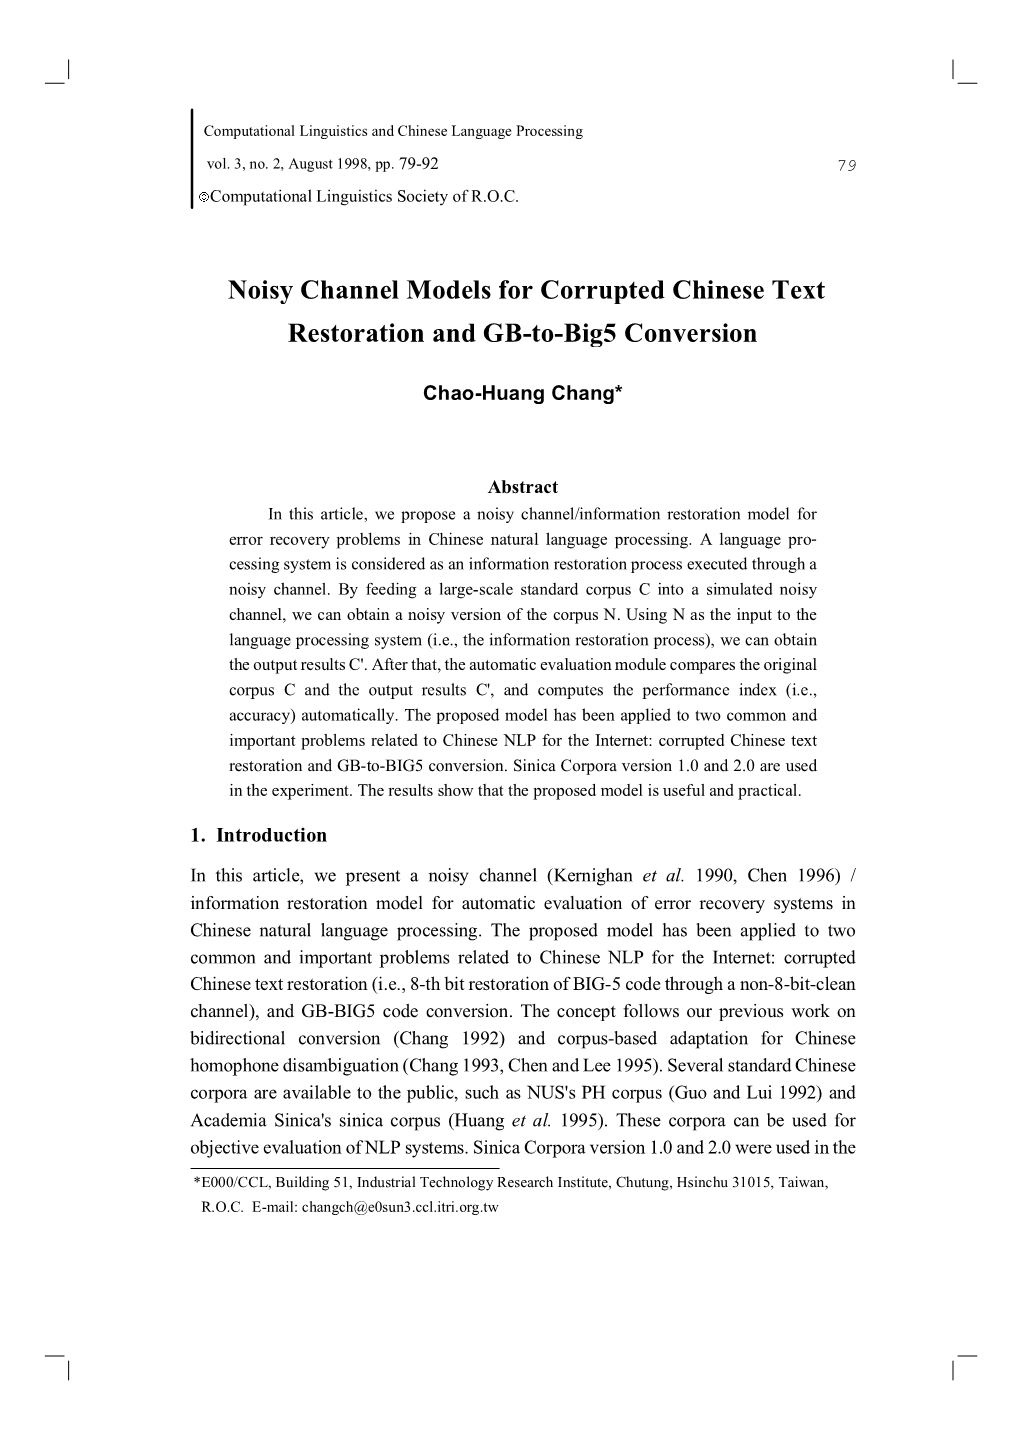 Noisy Channel Models for Corrupted Chinese Text Restoration and GB-To-Big5 Conversion